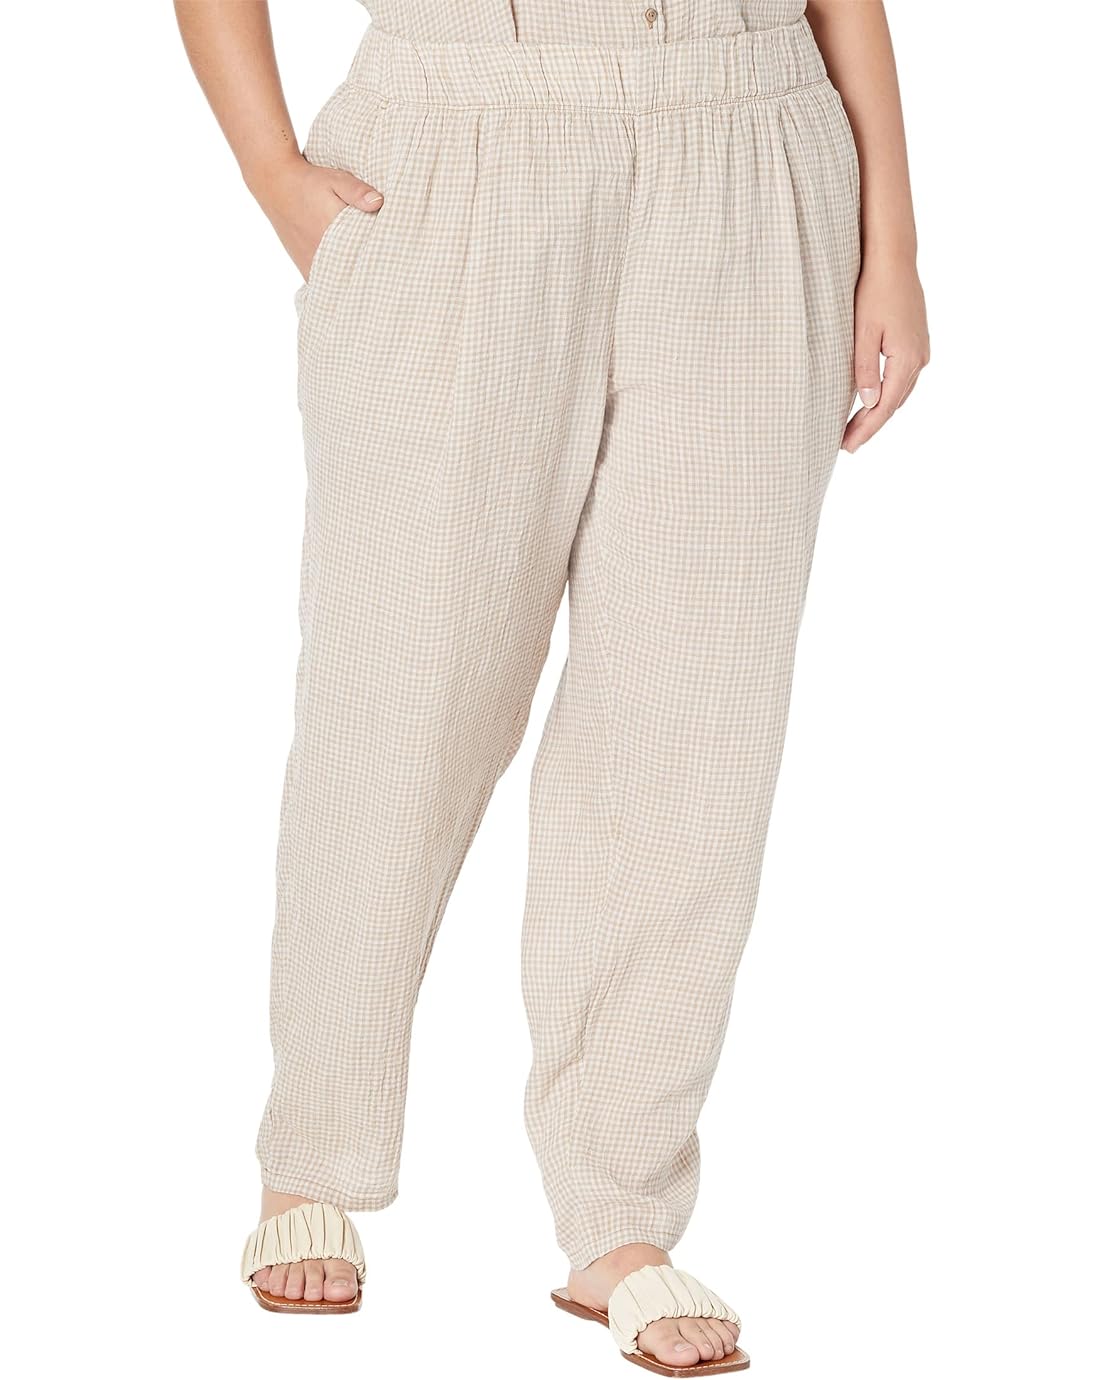 Eileen Fisher Tapered Ankle Pants in Puckered Organic Linen